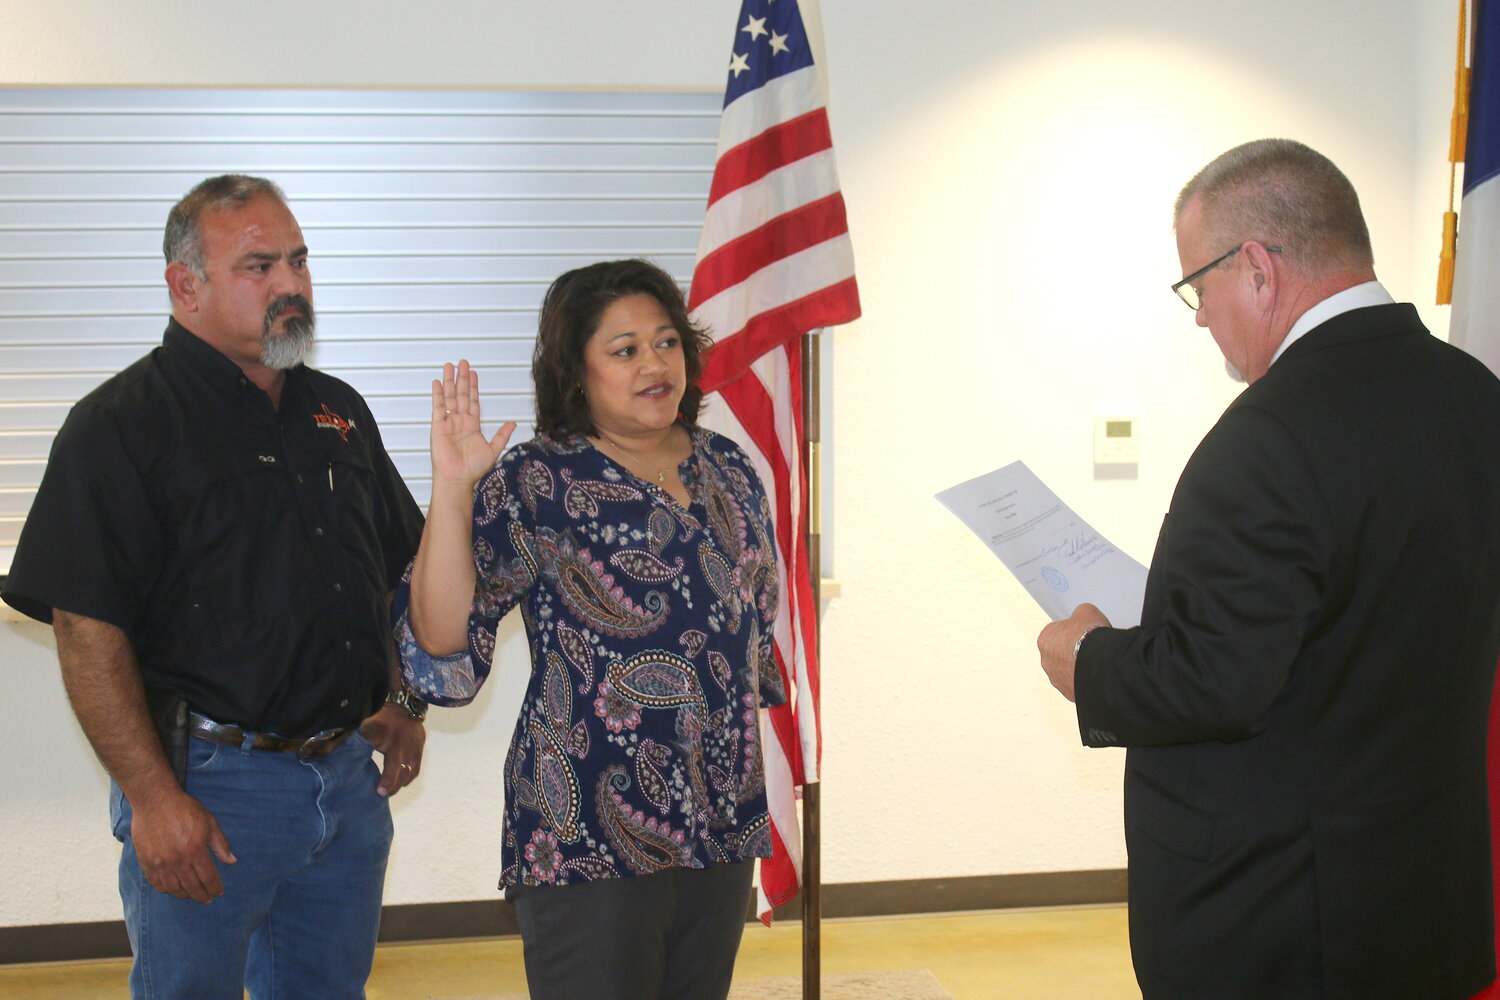 With her husband Mark Pompa beside her, incoming Nixon City Council member Melissa Mendez Pompa recites the oath of office as directed by Nixon Municipal Judge and Precinct 4 JP Darryl Becker at the regular council meeting on Monday, June 5. Pompa was elected last month.